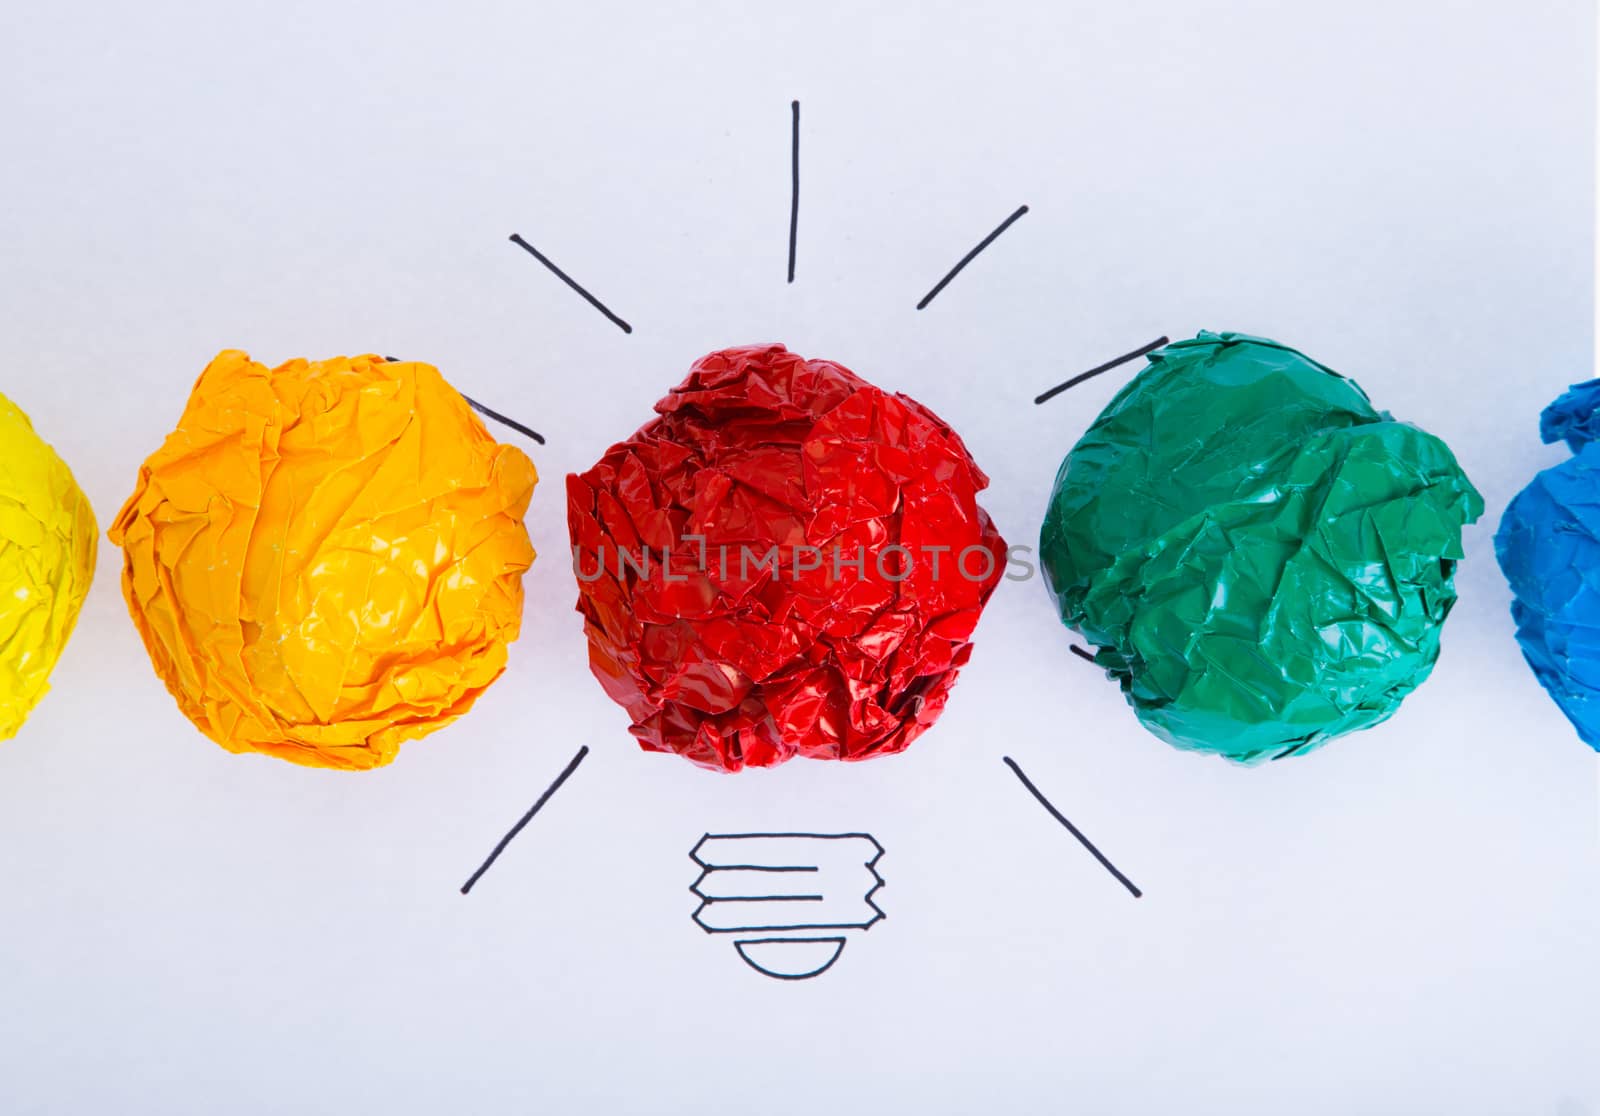 Inspiration concept crumpled color paper light bulb by tehcheesiong